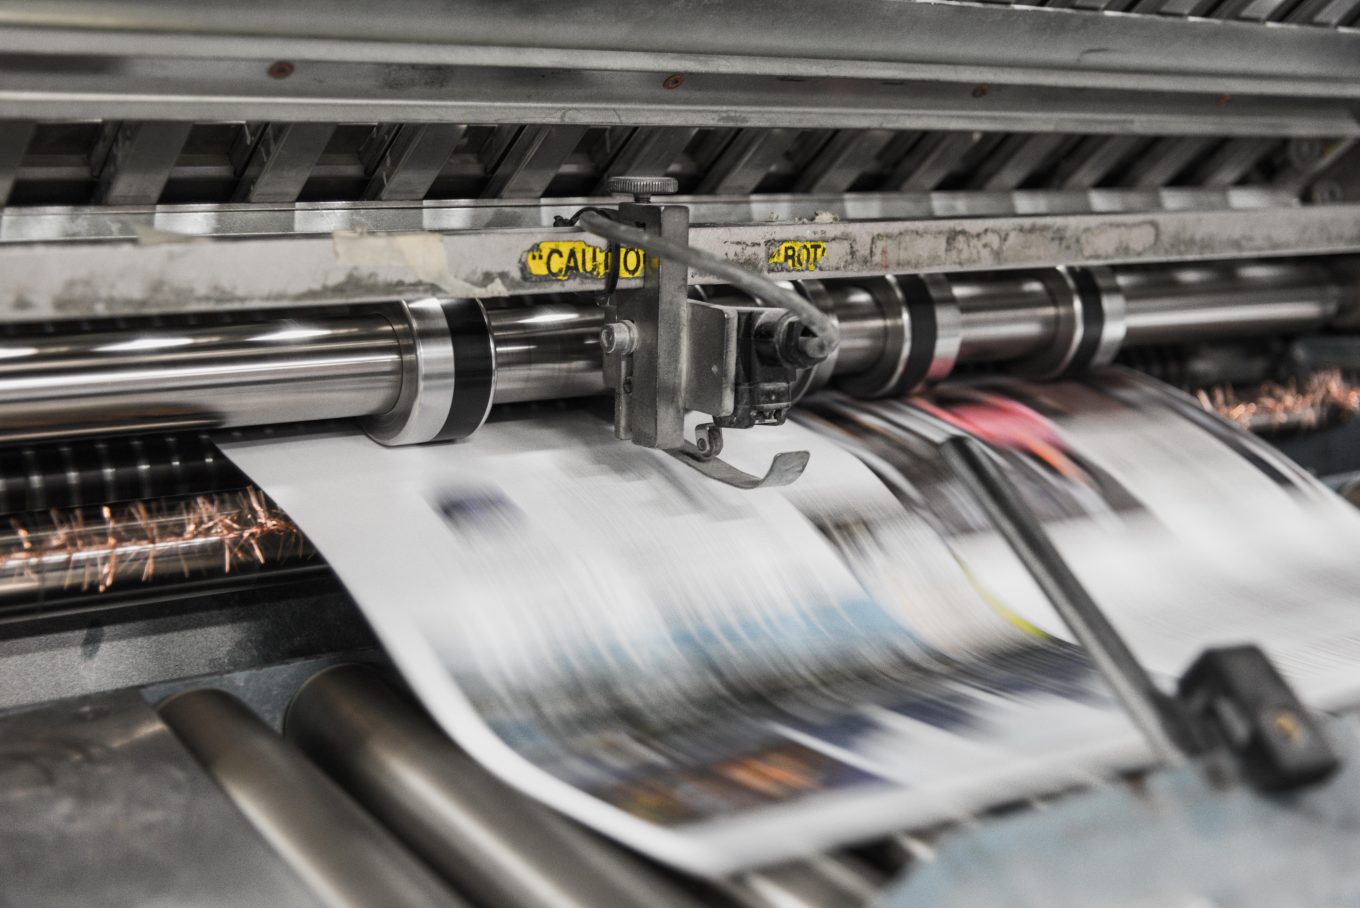 Photograph of an industrial printer printing magazine